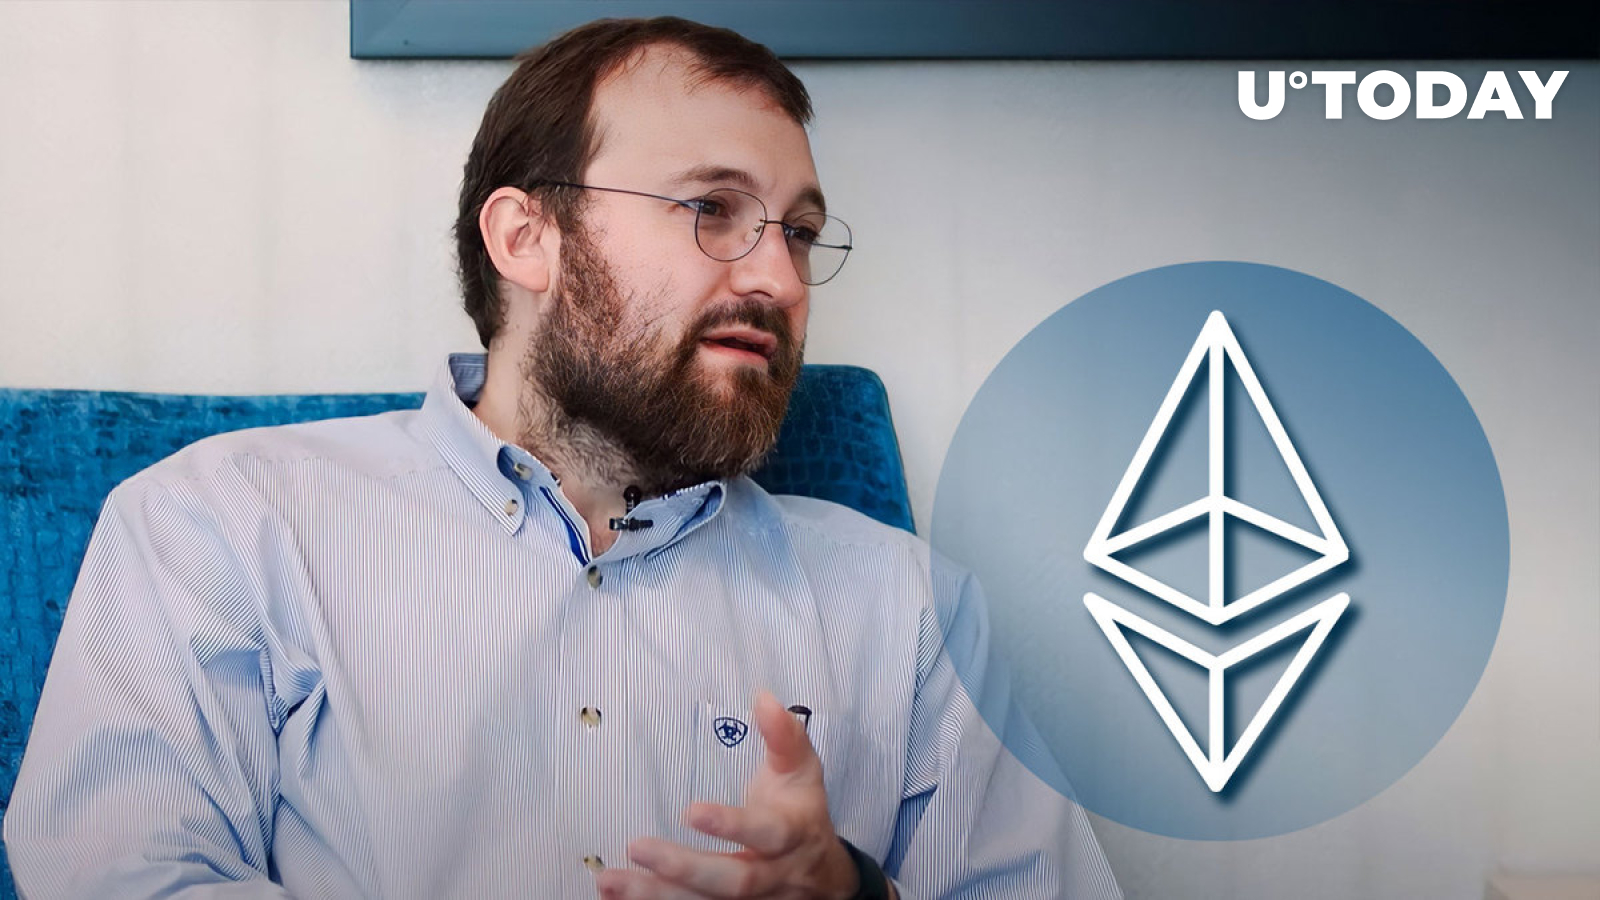 Cardano CEO Says Ethereum Staking Is Problematic, Here’s Why